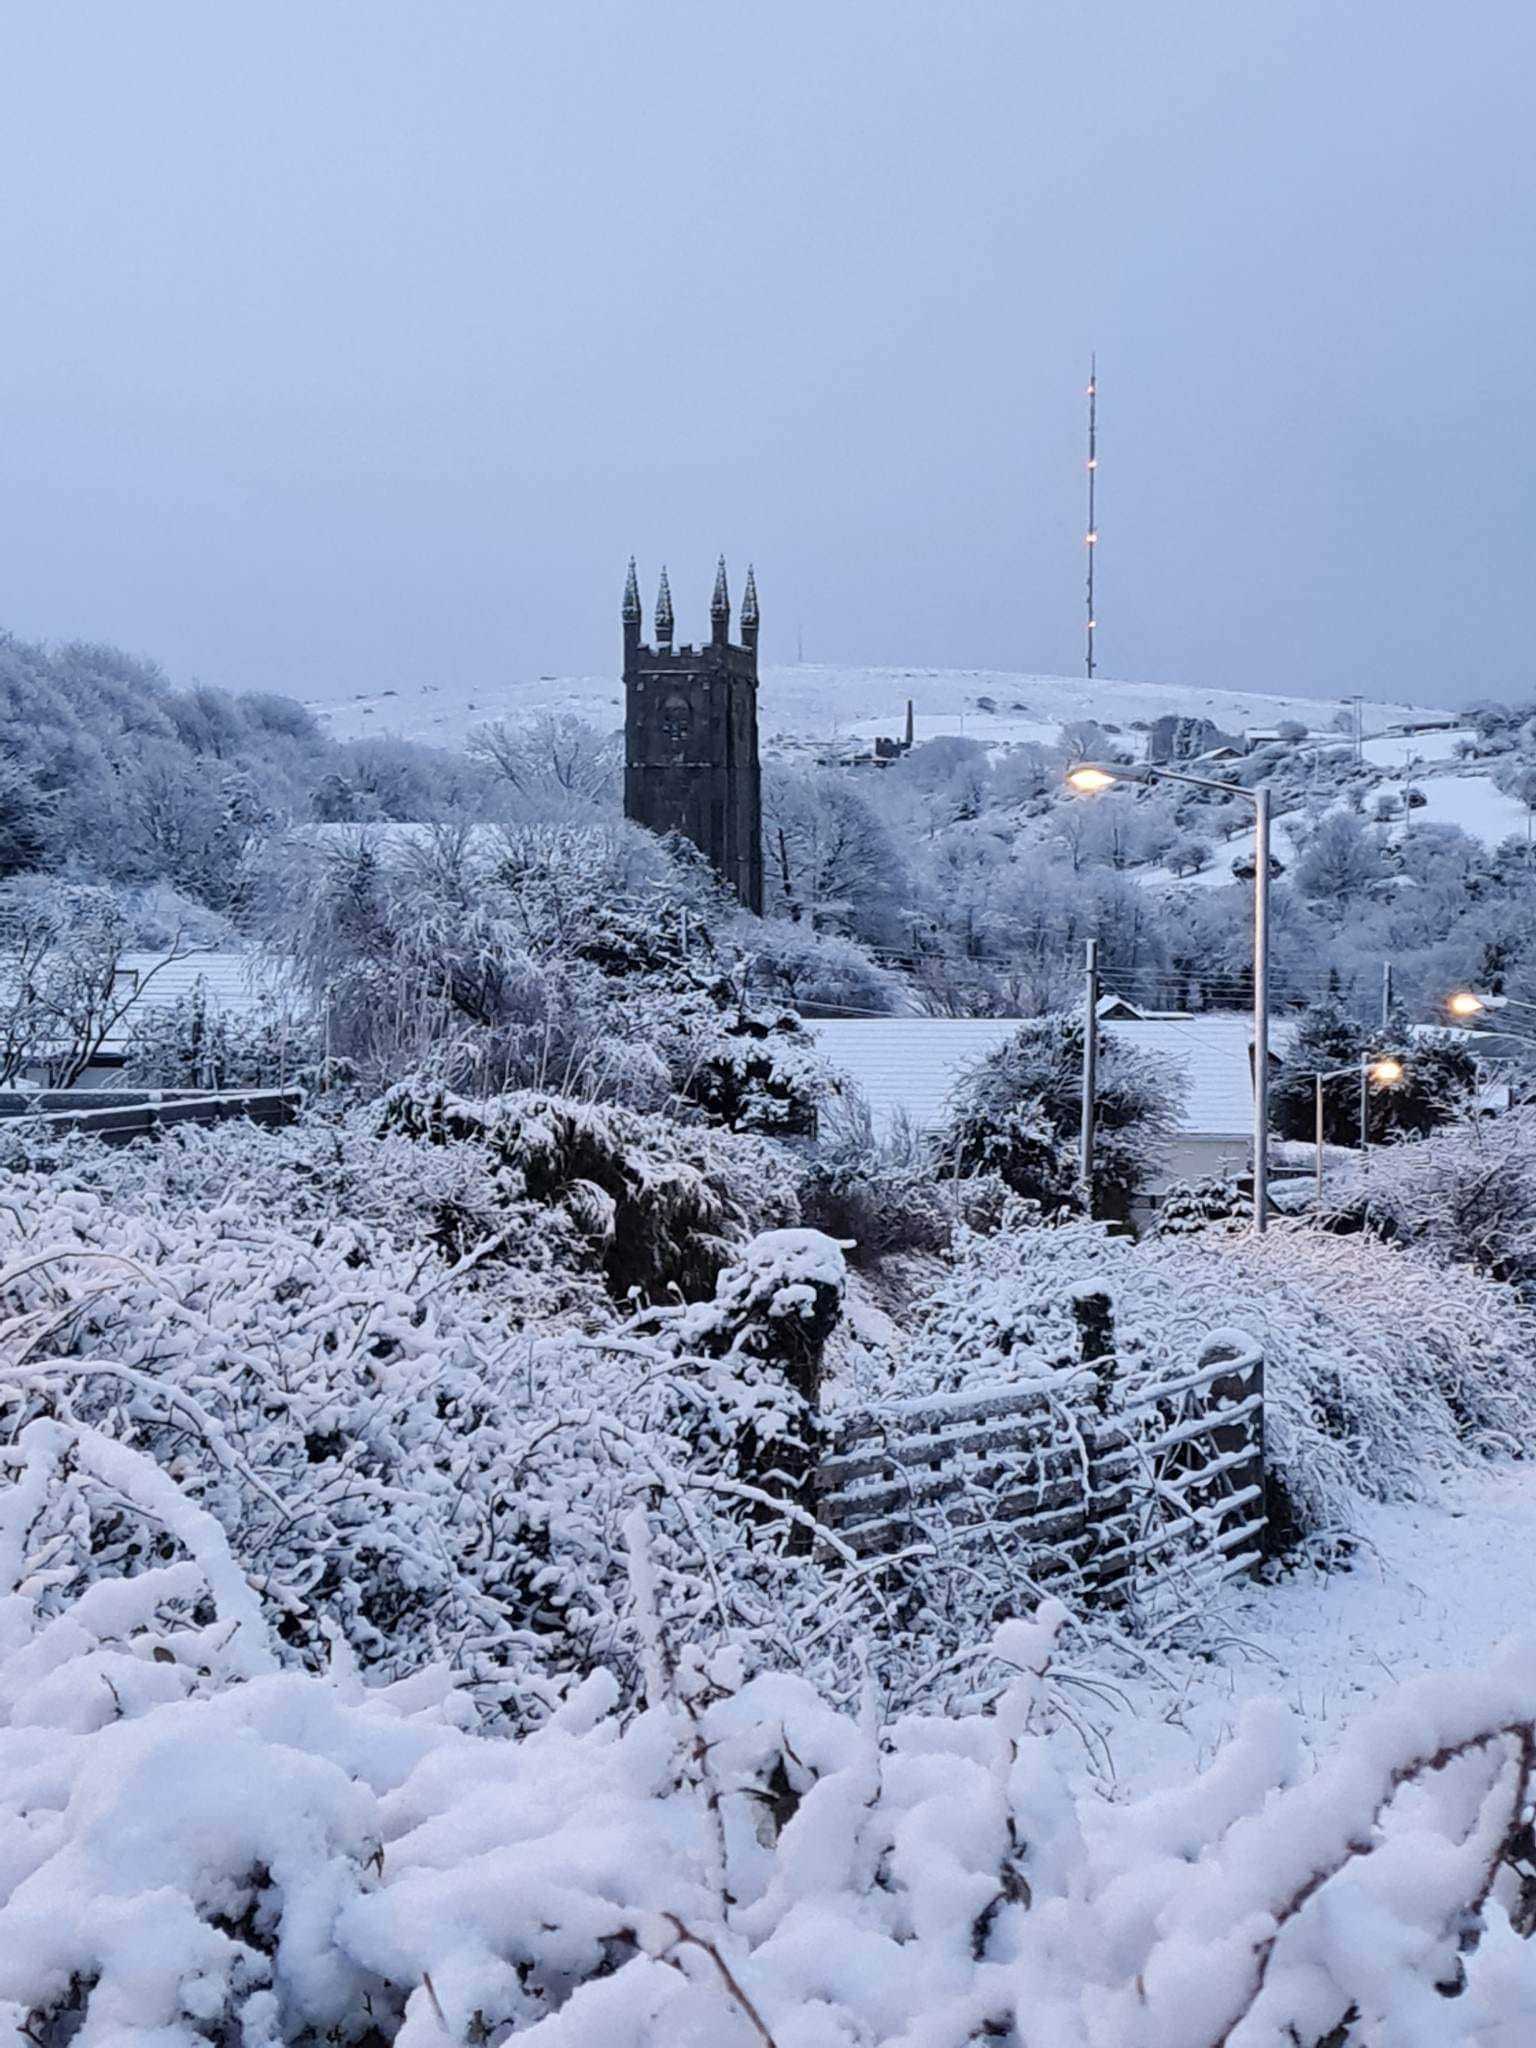 These pictures around Redruth and Carn Brea were captured by Anna Benney